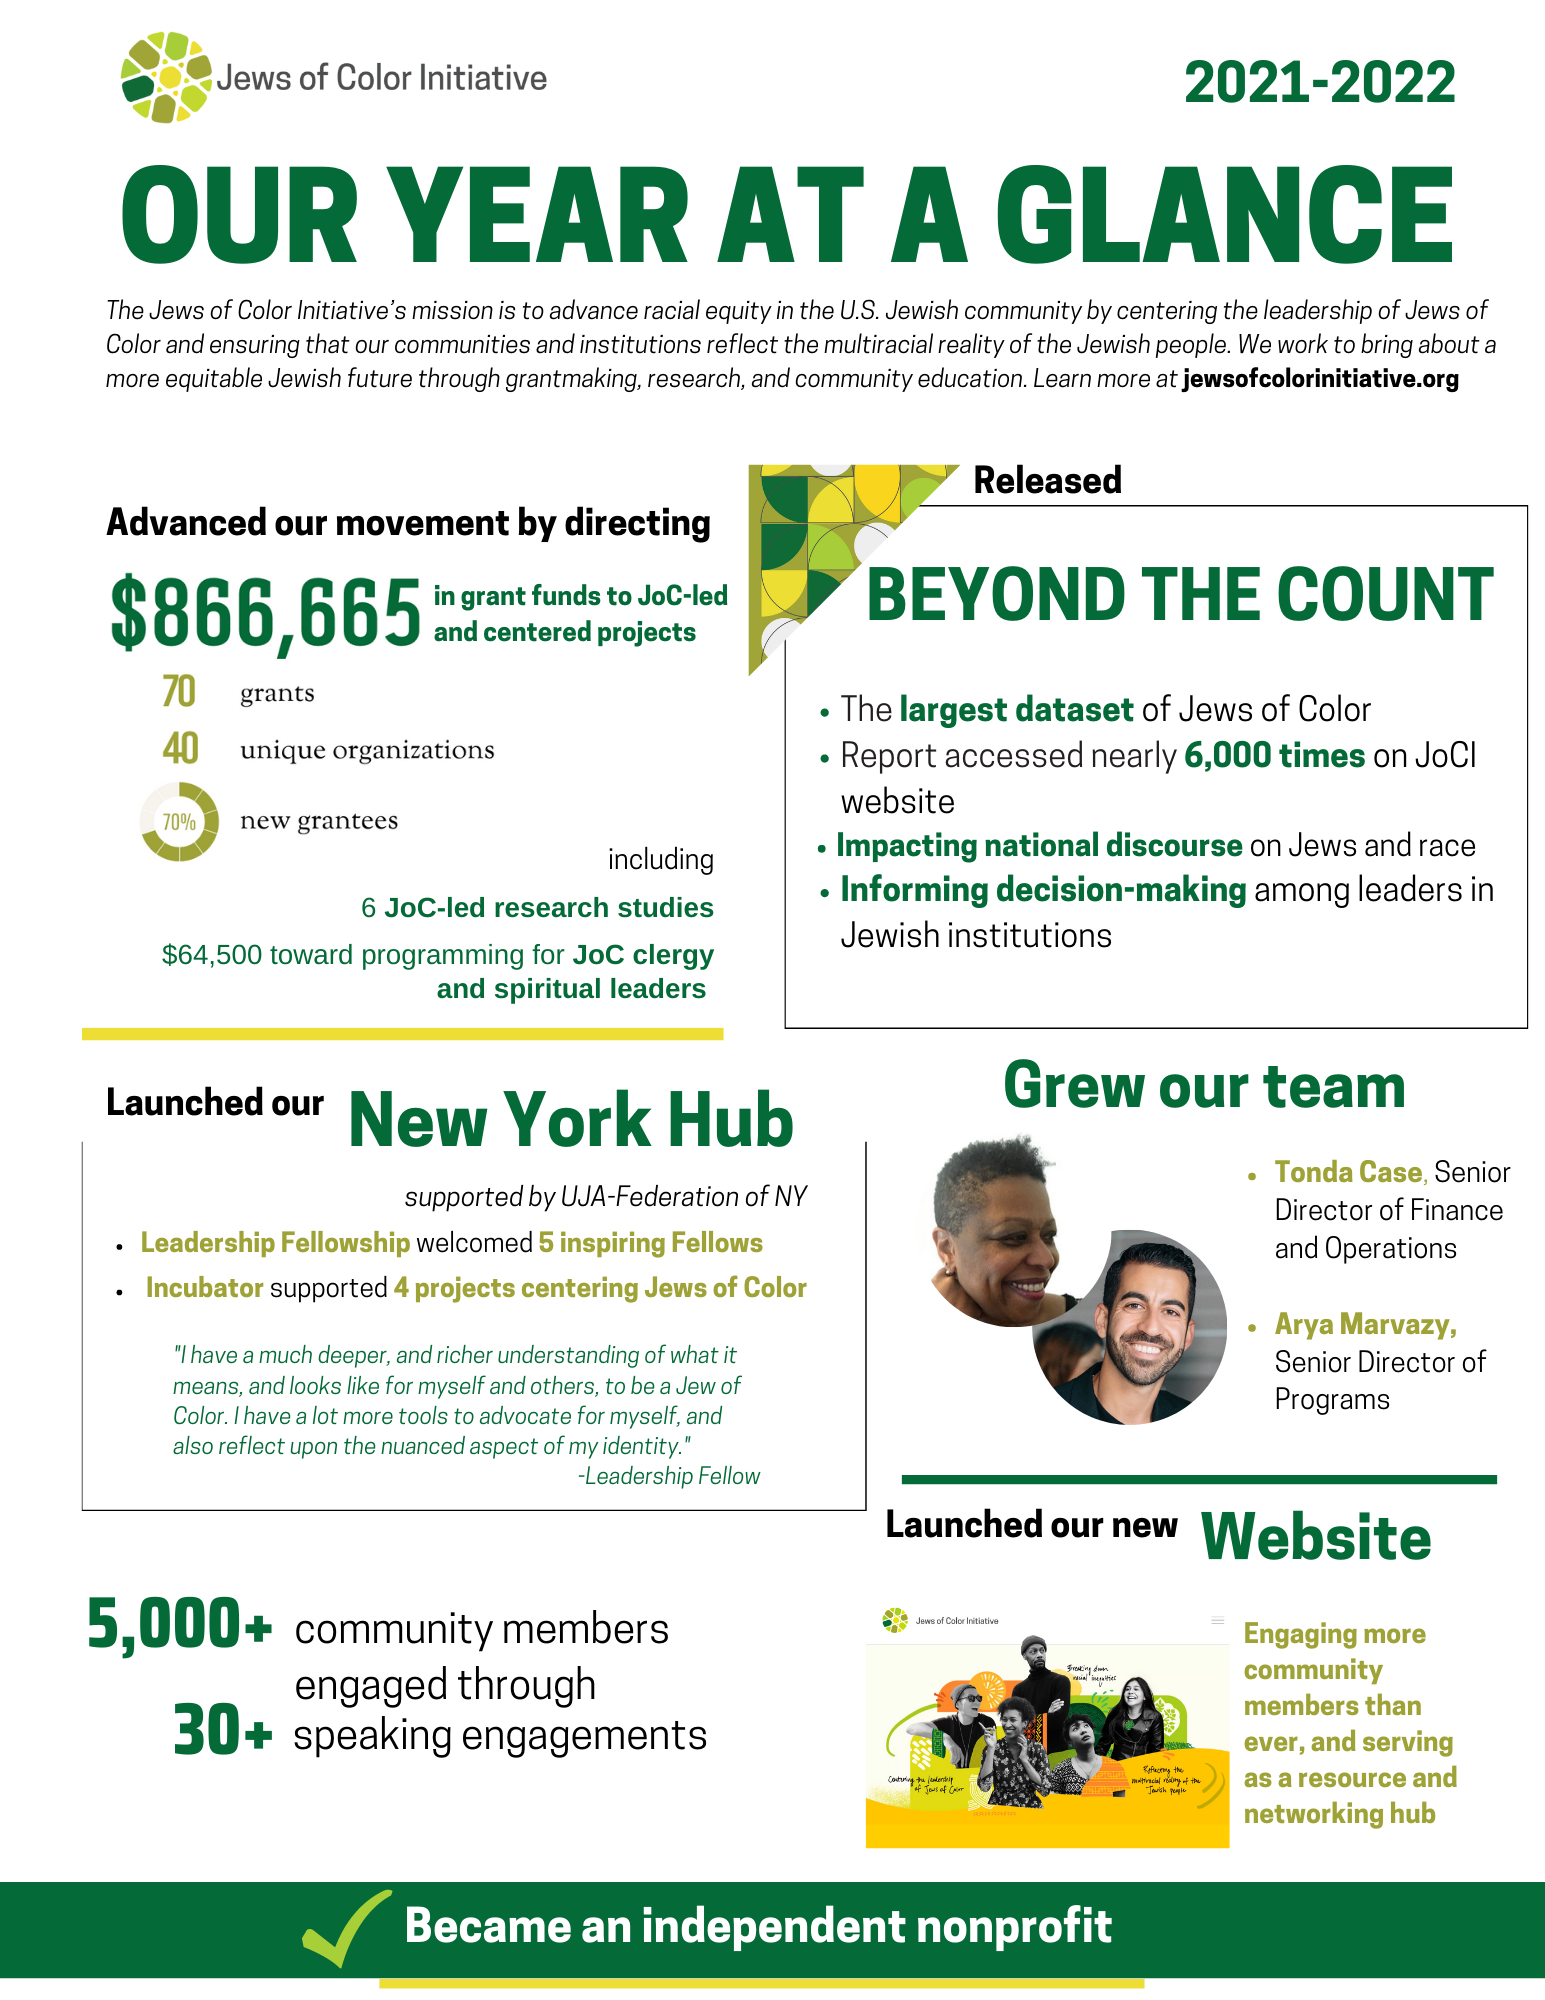 Our Year at a glance, grantmaking, research, New York Hub, etc.